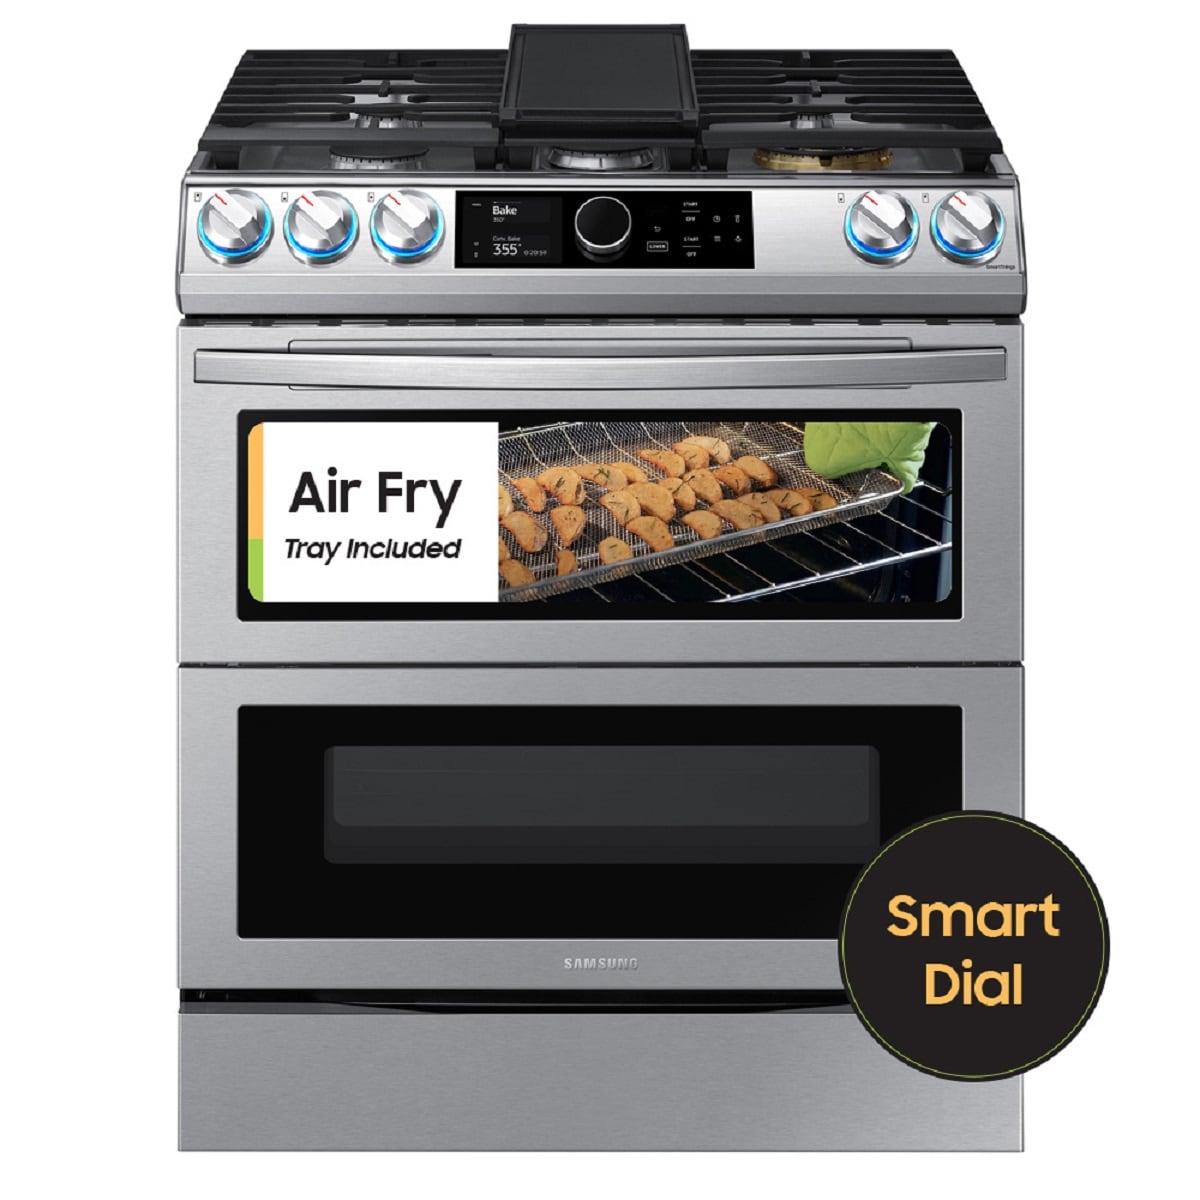 NX60T8751SS Samsung 30 Flex Duo Front Control Wifi Enabled Slide-In Gas  Range with Air Fry